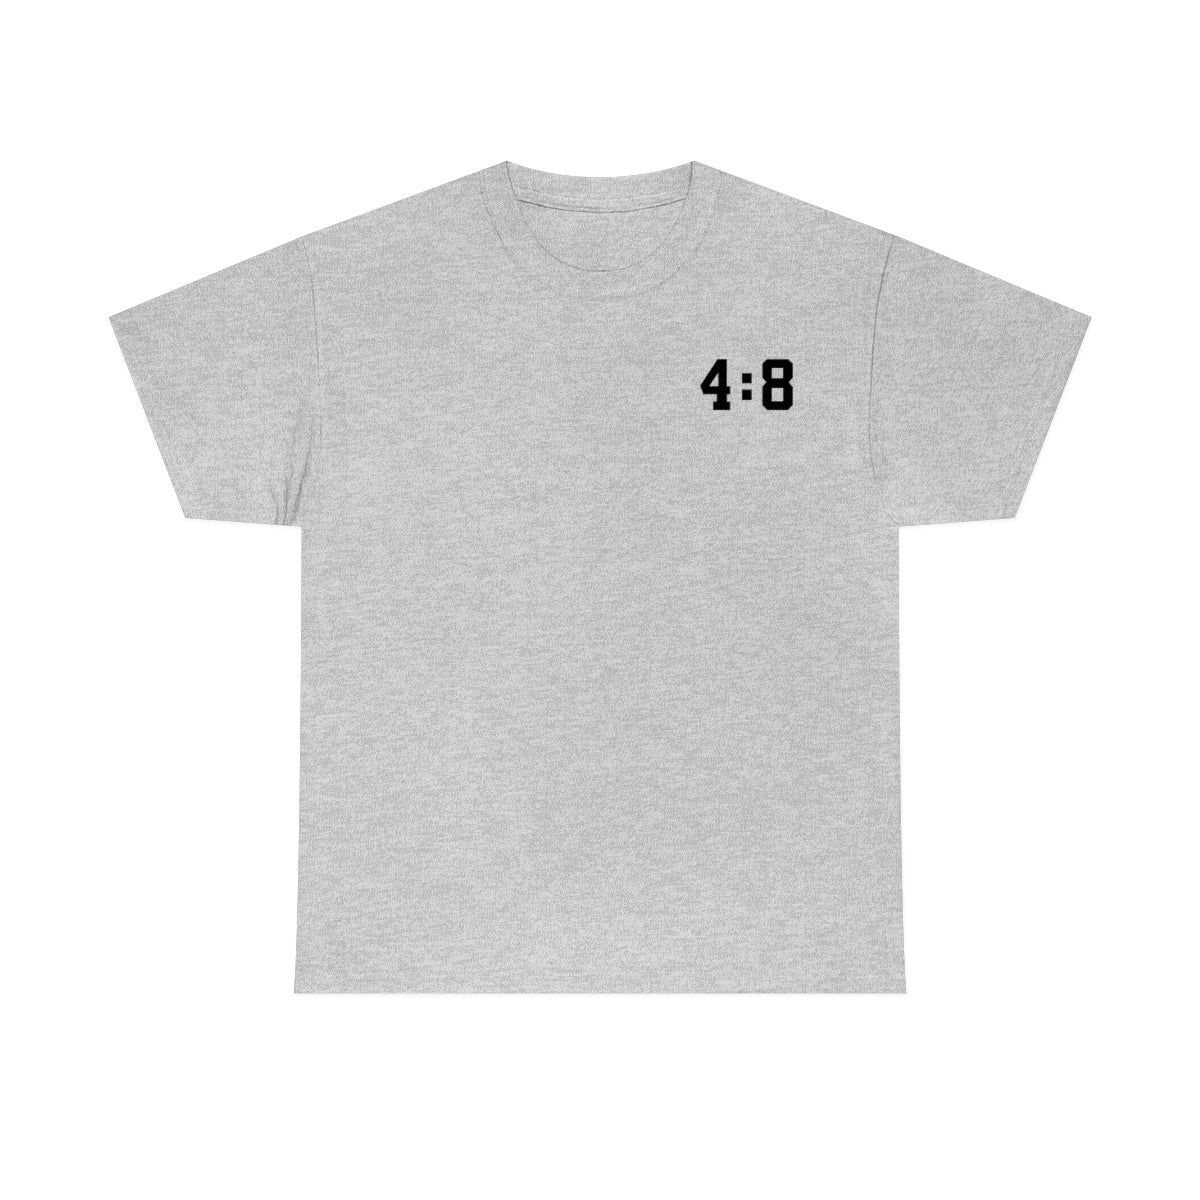 Braedon Lewis "BL" Double Sided Tee